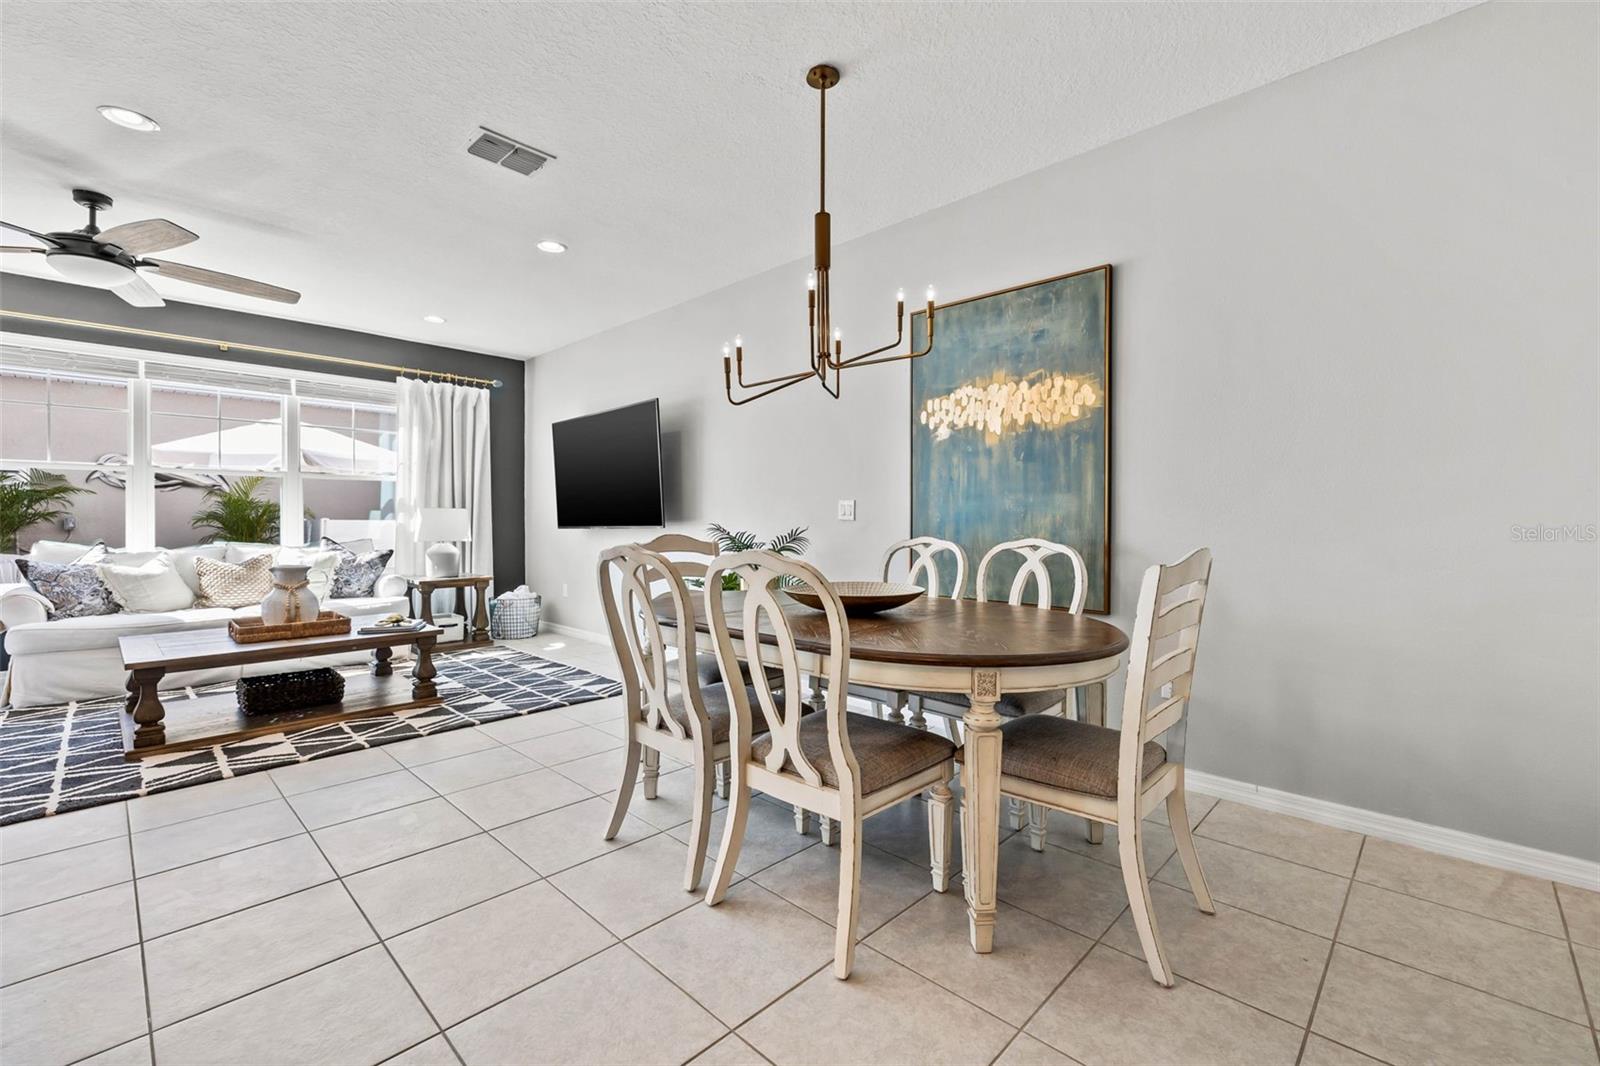 Featuring the spacious dinning area with upgraded light fixture from Pottery Barn.